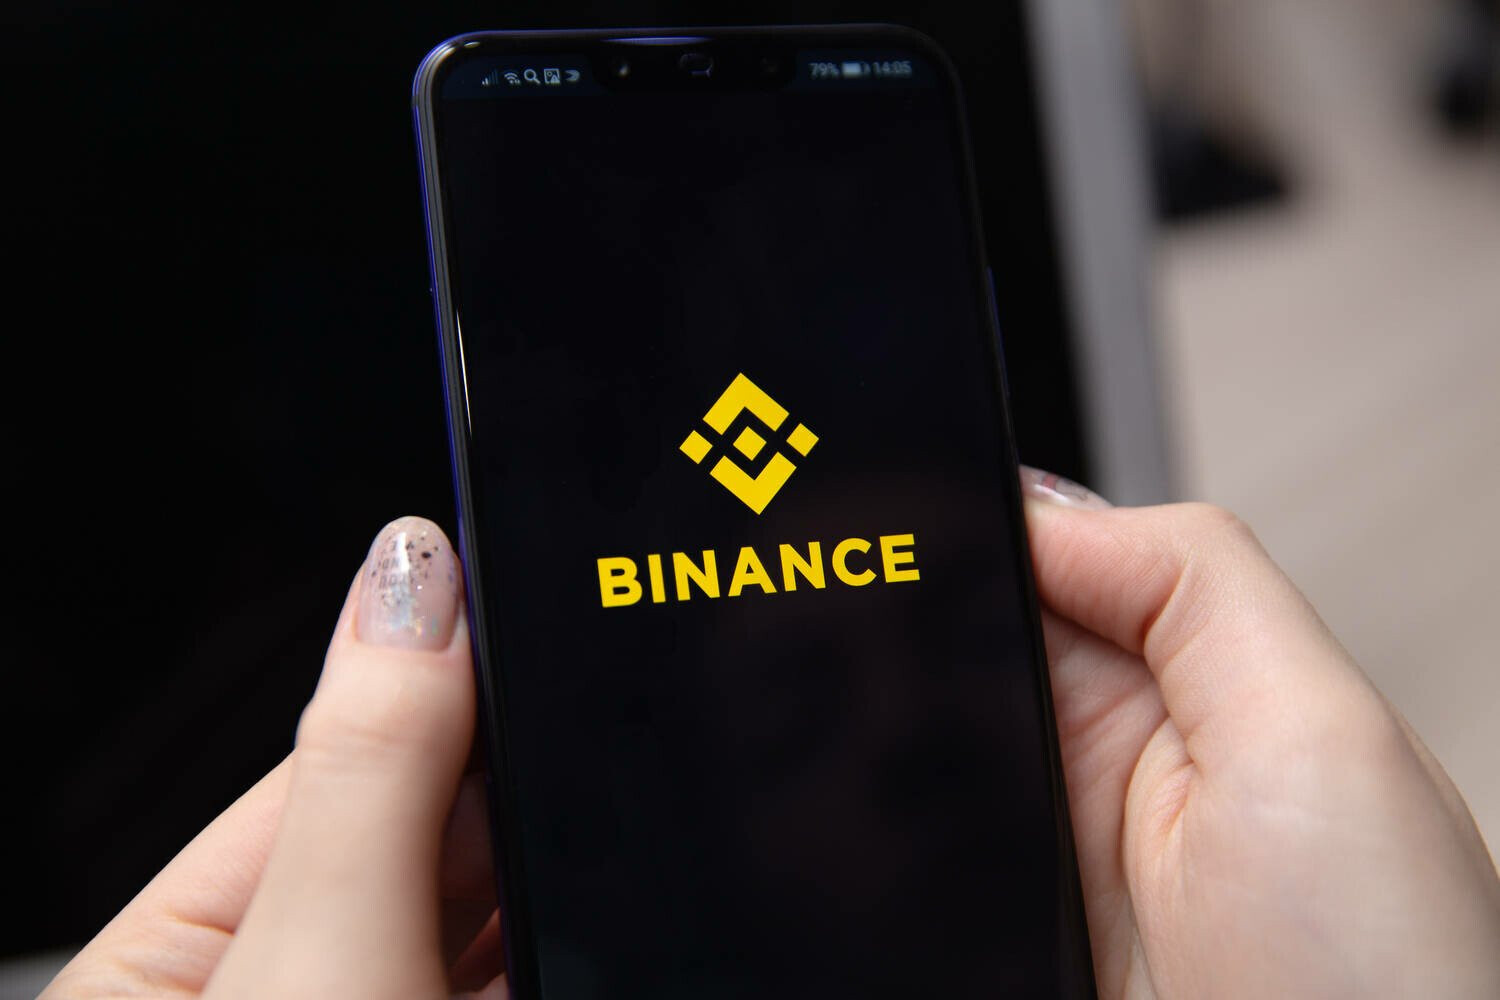 Chamber of Digital Commerce Joins Industry Leaders to Challenge SEC's Lawsuit Against Binance